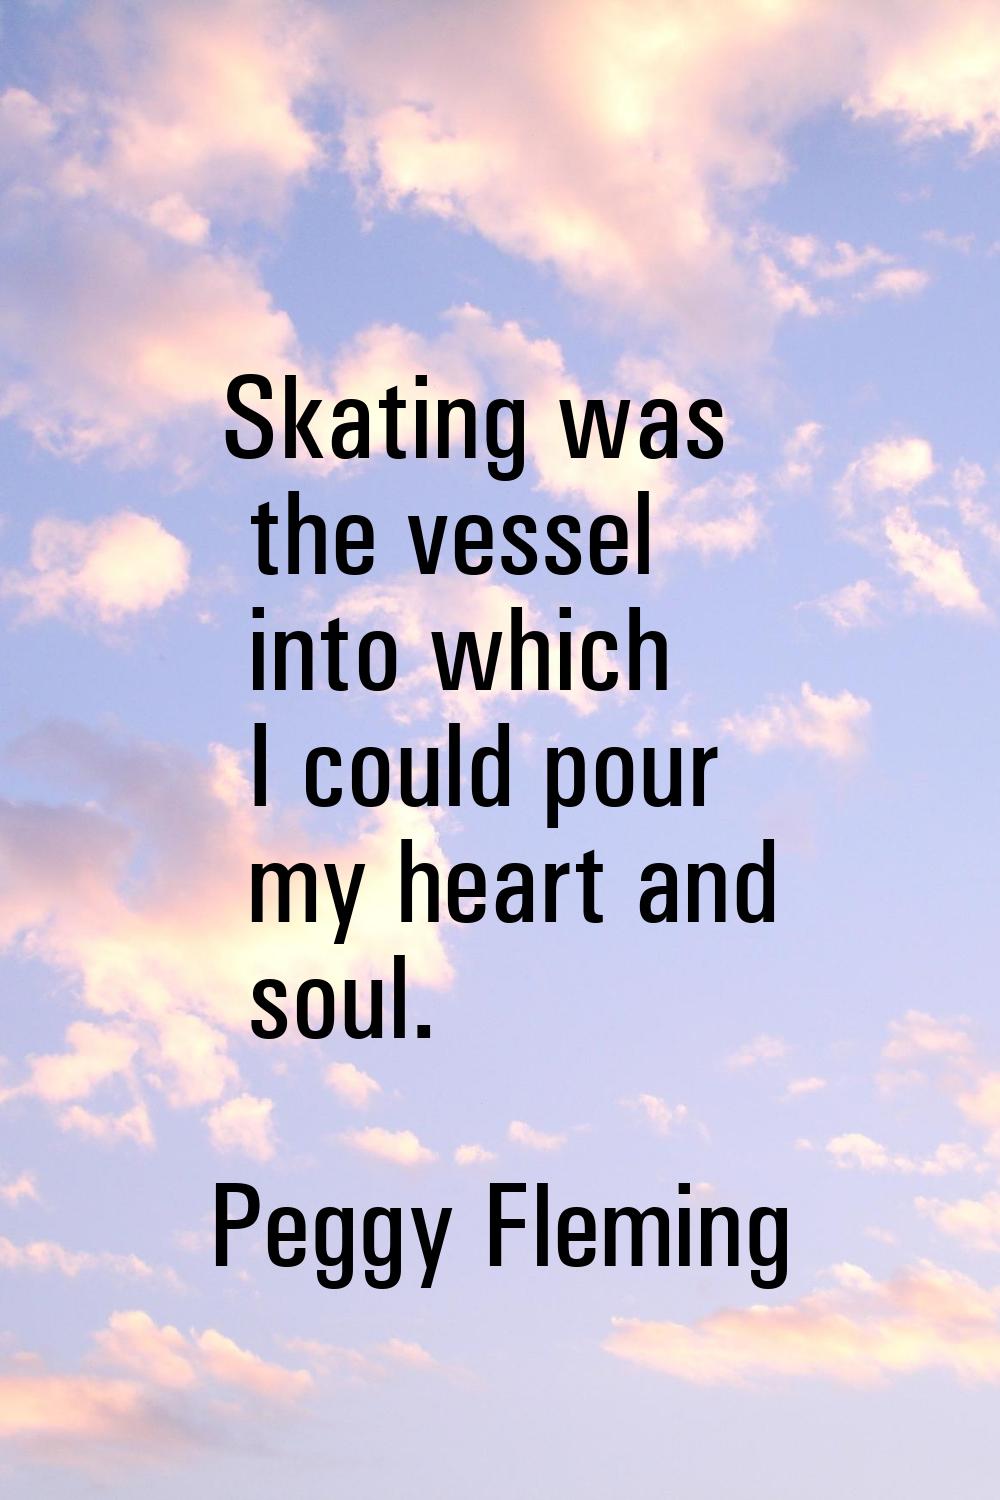 Skating was the vessel into which I could pour my heart and soul.